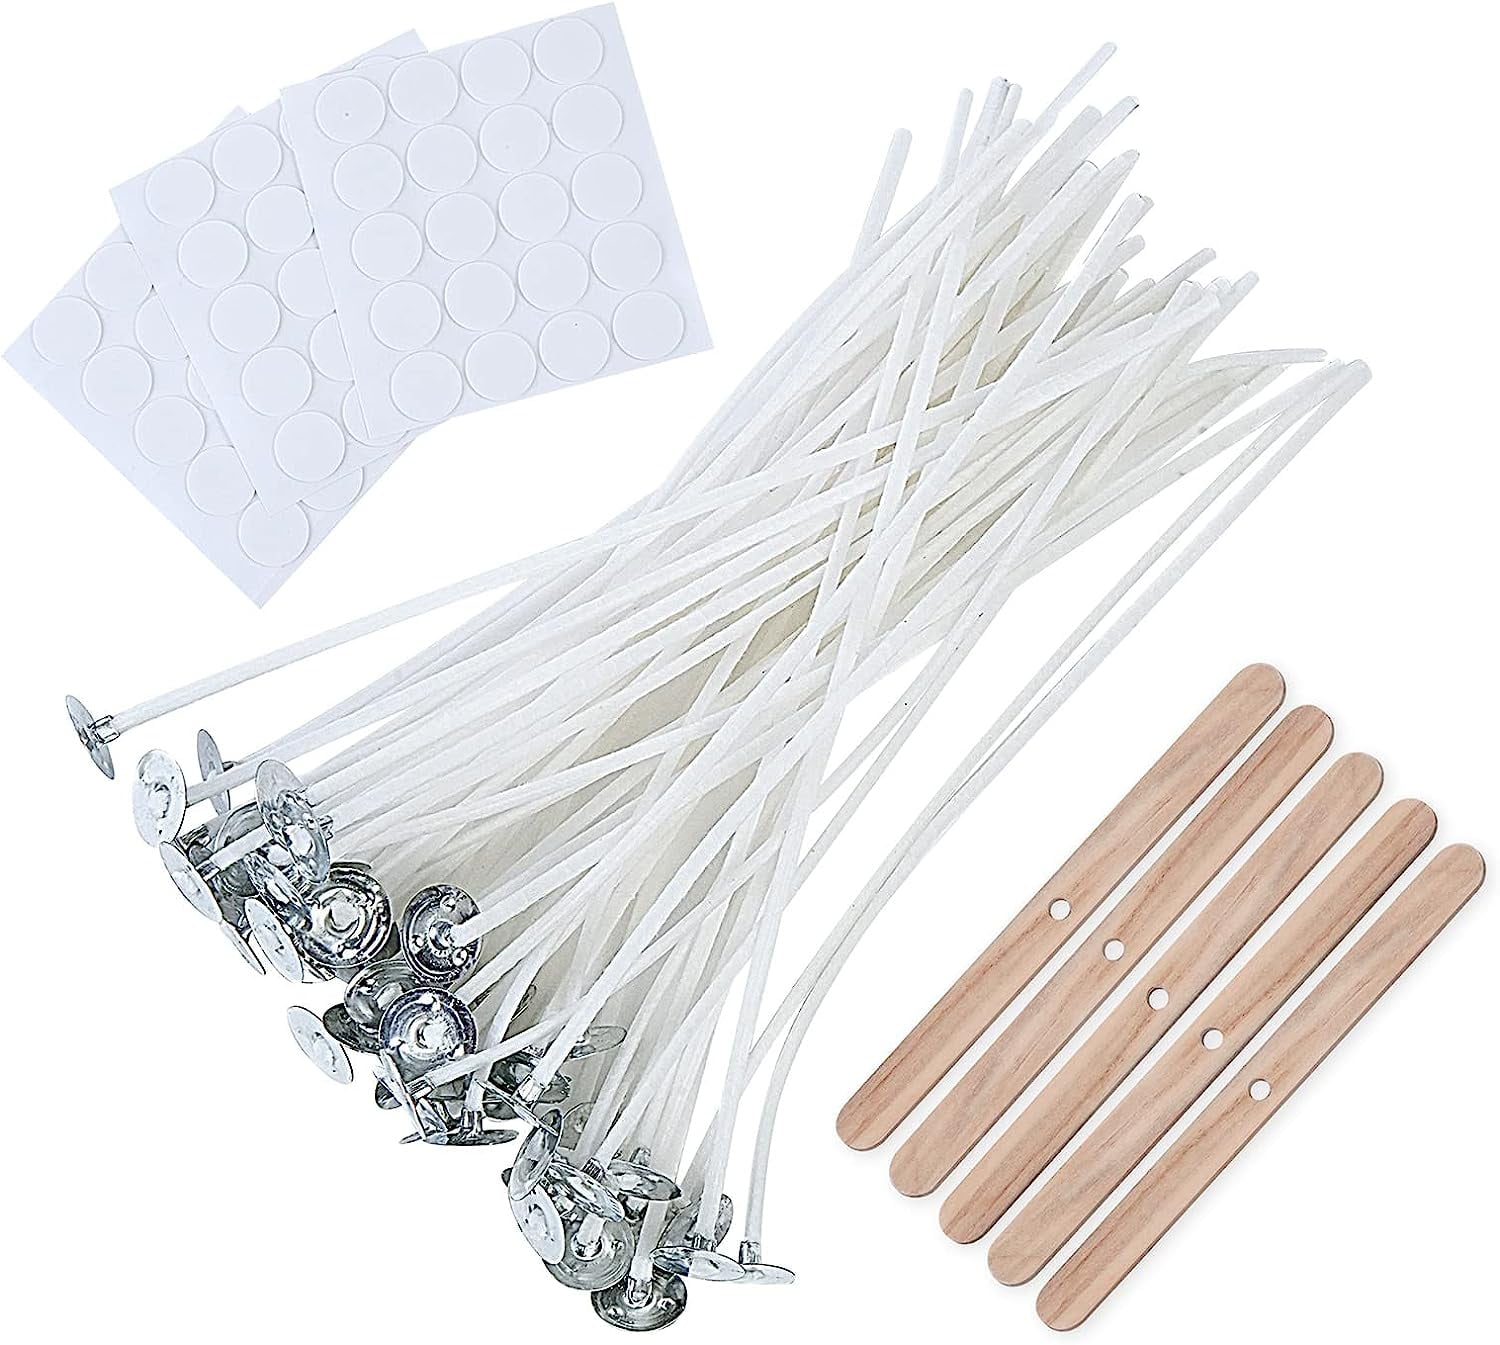 CandMak Candle Wick Kit, 60 Candle Wicks With Wick Stickers